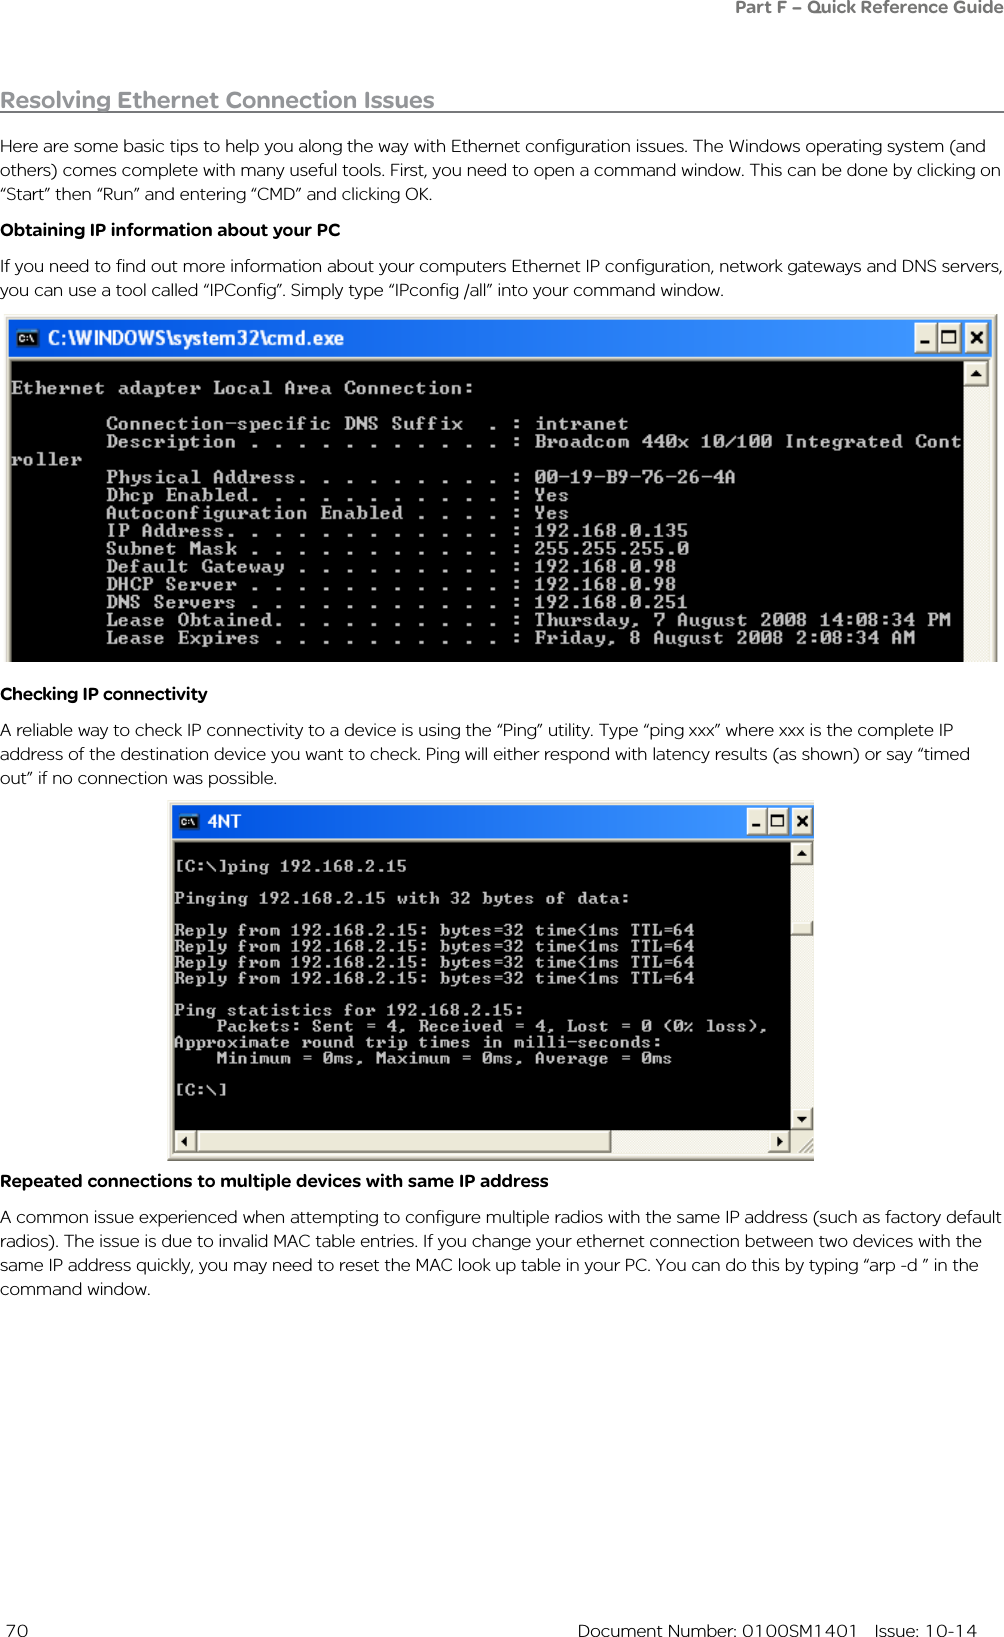  70  Document Number: 0100SM1401   Issue: 10-14Resolving Ethernet Connection IssuesHere are some basic tips to help you along the way with Ethernet configuration issues. The Windows operating system (and others) comes complete with many useful tools. First, you need to open a command window. This can be done by clicking on “Start” then “Run” and entering “CMD” and clicking OK. Obtaining IP information about your PCIf you need to find out more information about your computers Ethernet IP configuration, network gateways and DNS servers, you can use a tool called “IPConfig”. Simply type “IPconfig /all” into your command window.Checking IP connectivityA reliable way to check IP connectivity to a device is using the “Ping” utility. Type “ping xxx” where xxx is the complete IP address of the destination device you want to check. Ping will either respond with latency results (as shown) or say “timed out” if no connection was possible.  Repeated connections to multiple devices with same IP addressA common issue experienced when attempting to configure multiple radios with the same IP address (such as factory default radios). The issue is due to invalid MAC table entries. If you change your ethernet connection between two devices with the same IP address quickly, you may need to reset the MAC look up table in your PC. You can do this by typing “arp -d ” in the command window. Part F – Quick Reference Guide